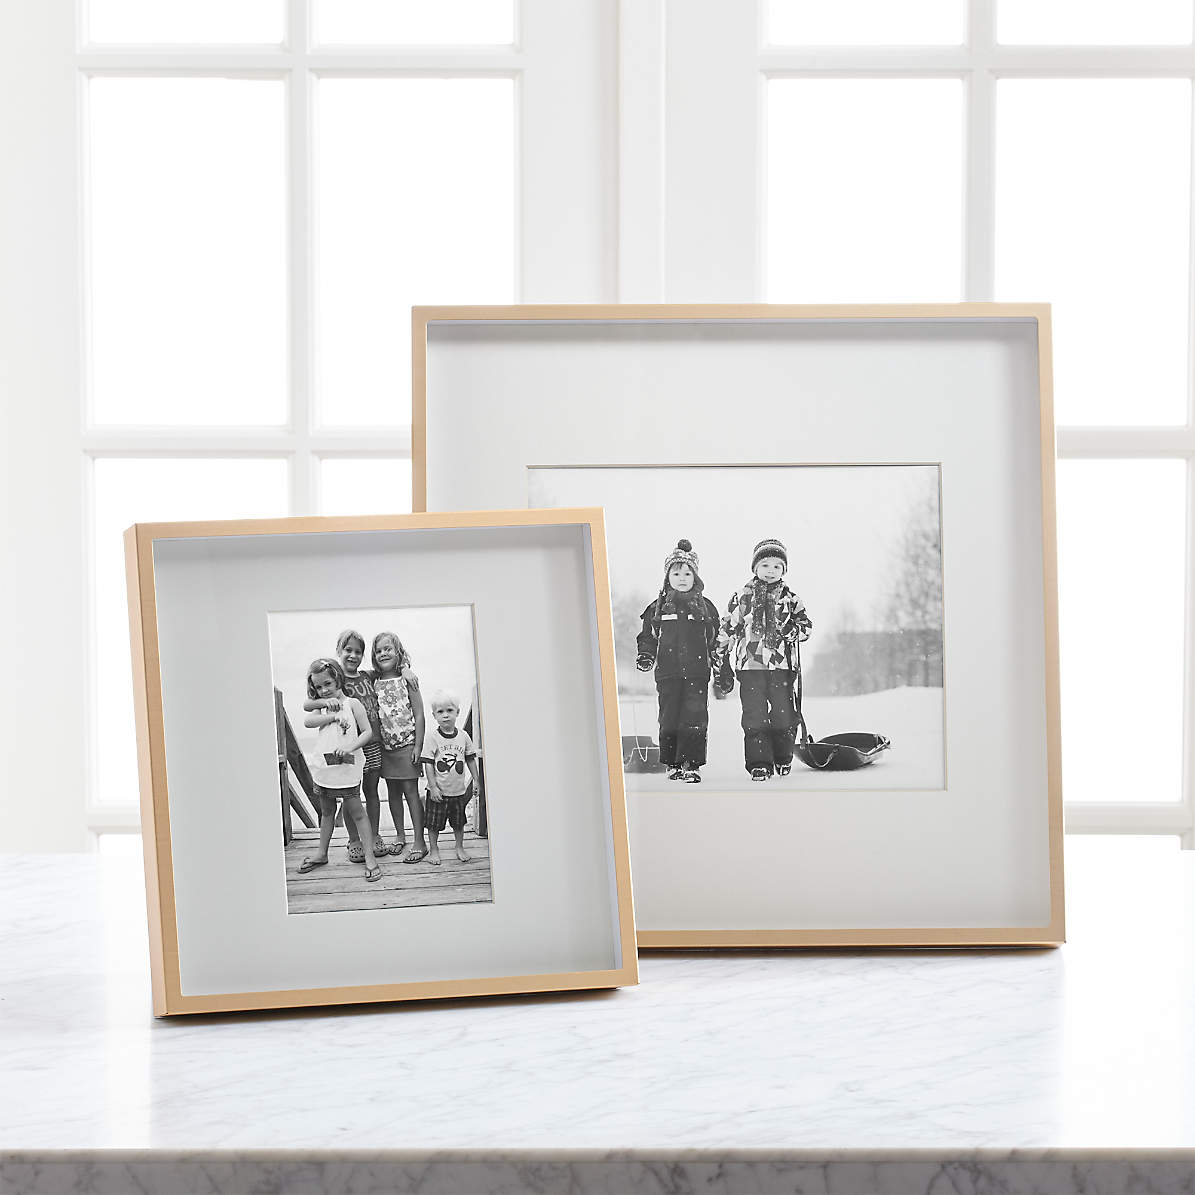 Details about   Bucharest Range Wide Frame Picture Photo Frames Decor With Mount Gold and Bronze 